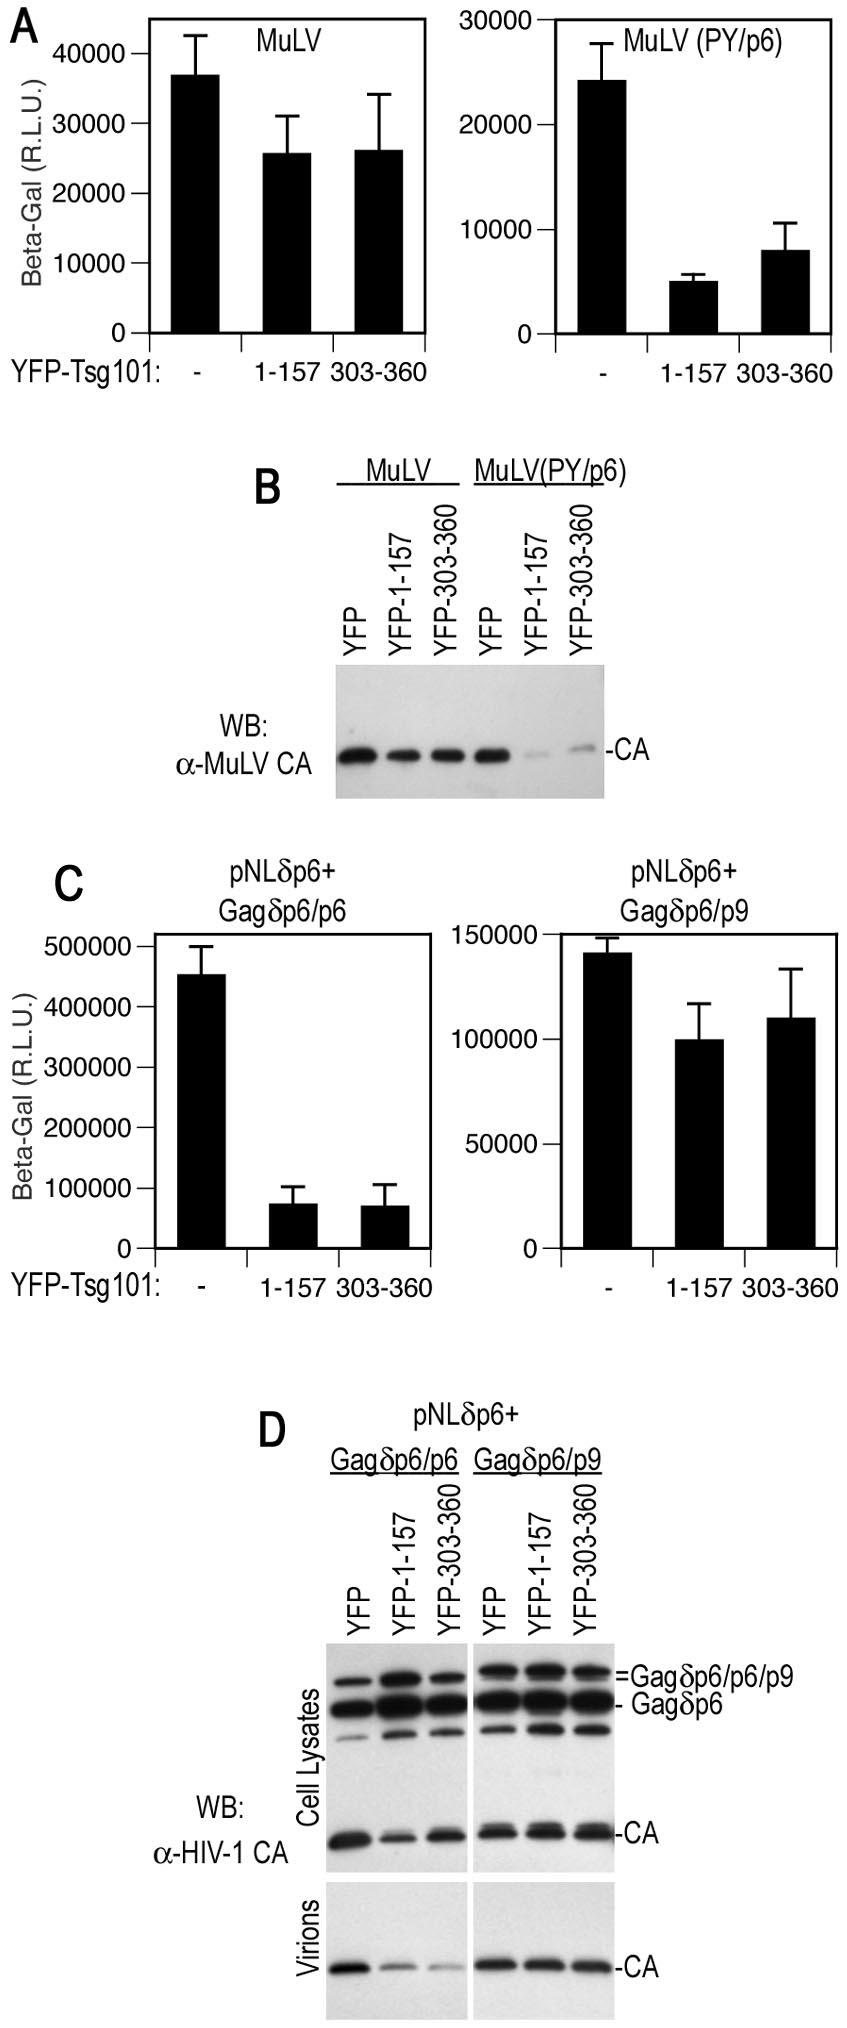 VOL. 77, 2003 ESCRT-I AND RETROVIRAL BUDDING 4801 FIG. 6. Selective inhibition of PTAP-type L-domain function by a minimal Tsg101 multimerizing domain.